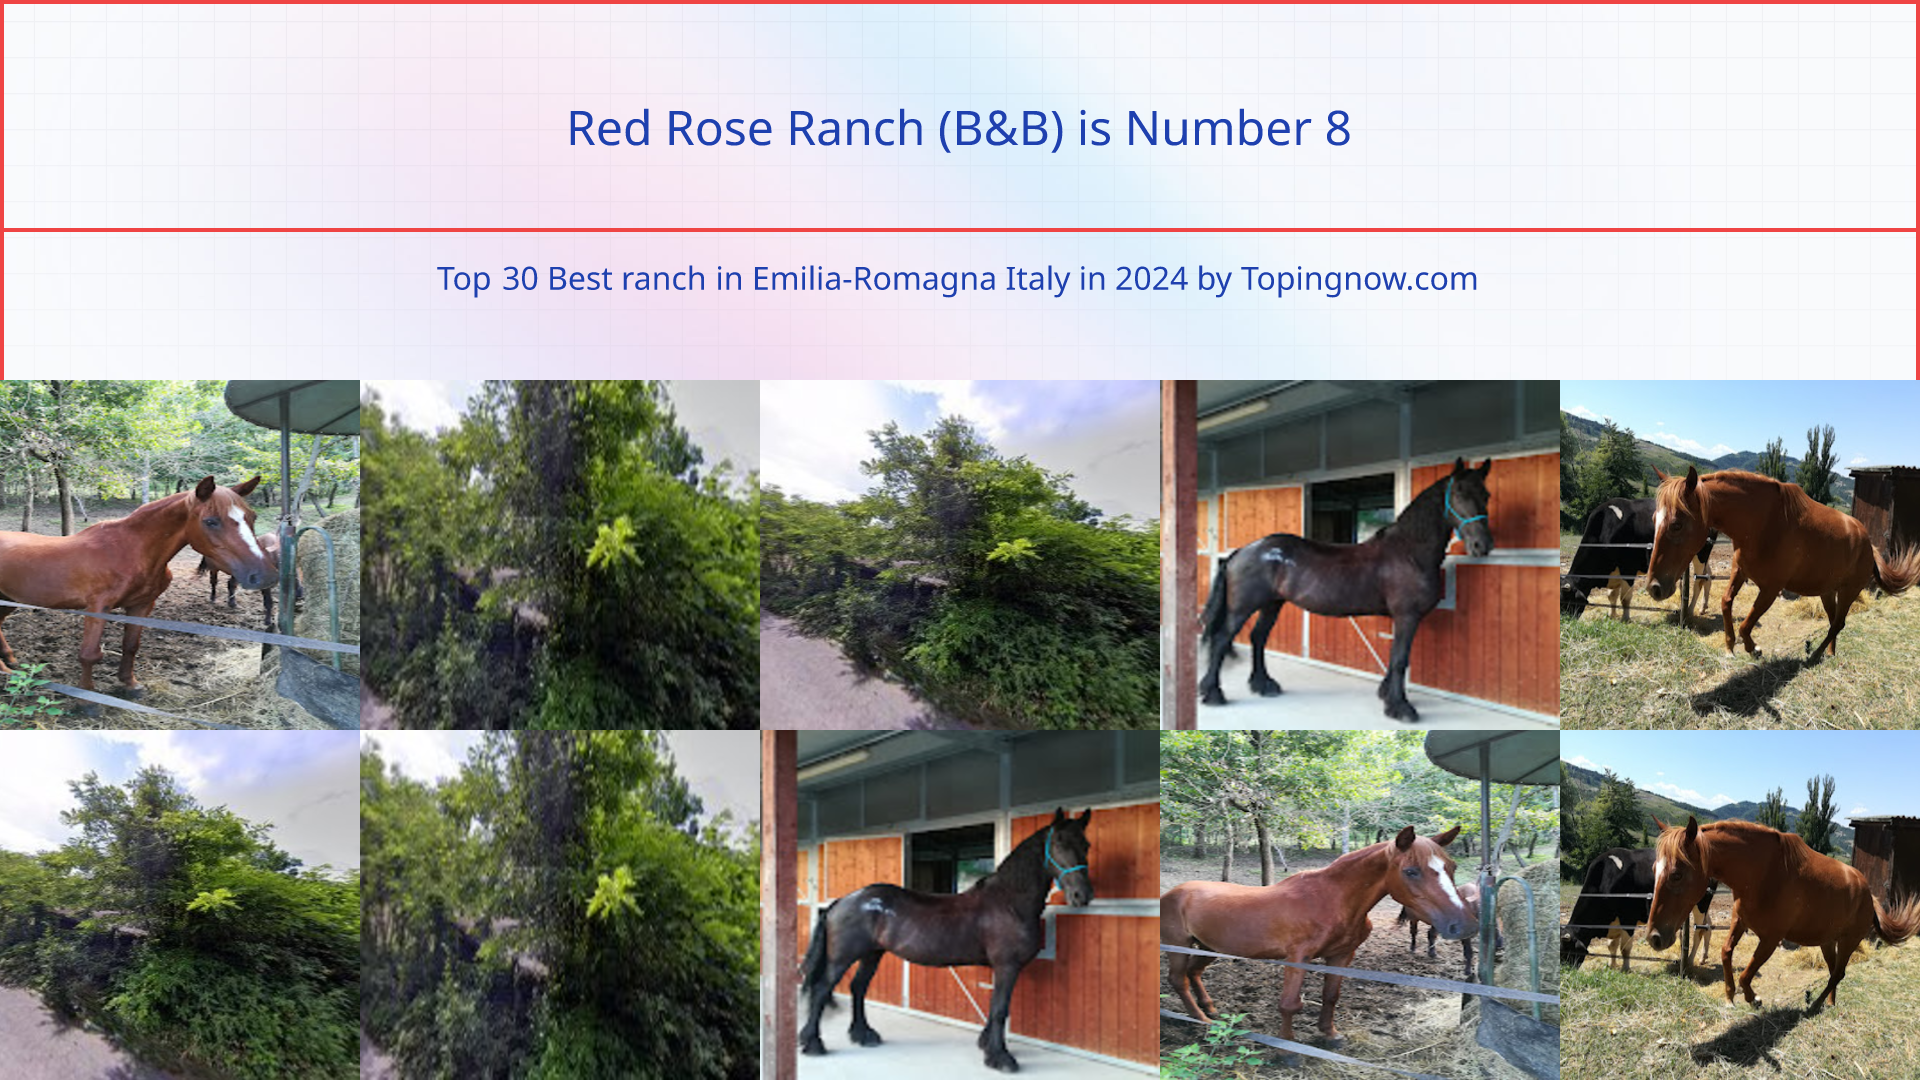 Red Rose Ranch (B&B): Top 30 Best ranch in Emilia-Romagna Italy in 2024